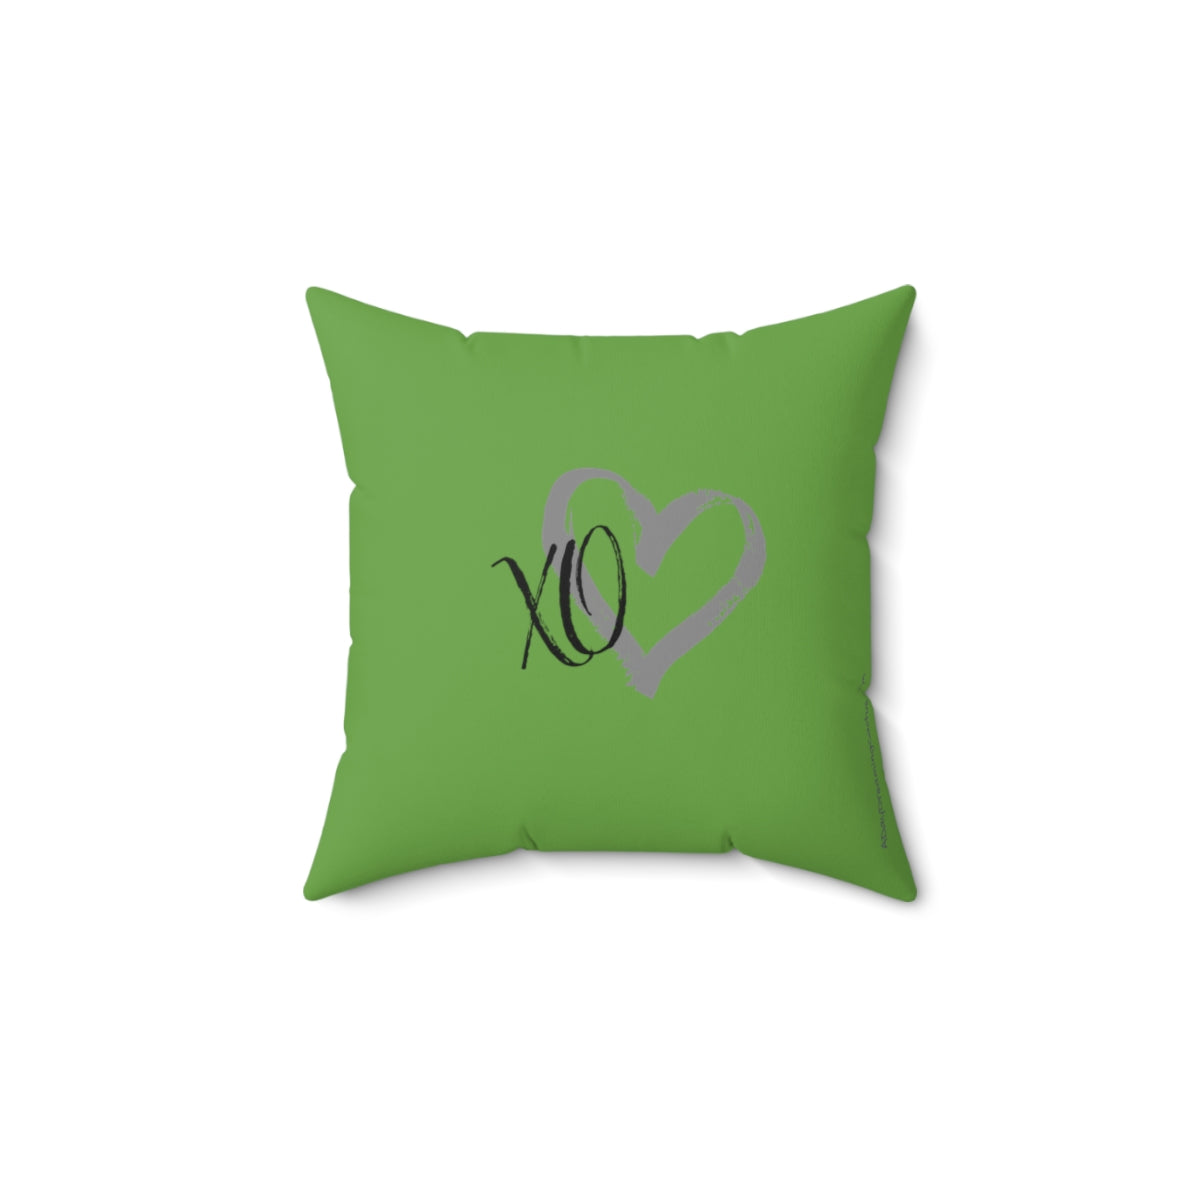 Green Square Pillow Case - Home Is Where My Dog Is - Home Decor Pillow Cover - Accent Pillow Cover